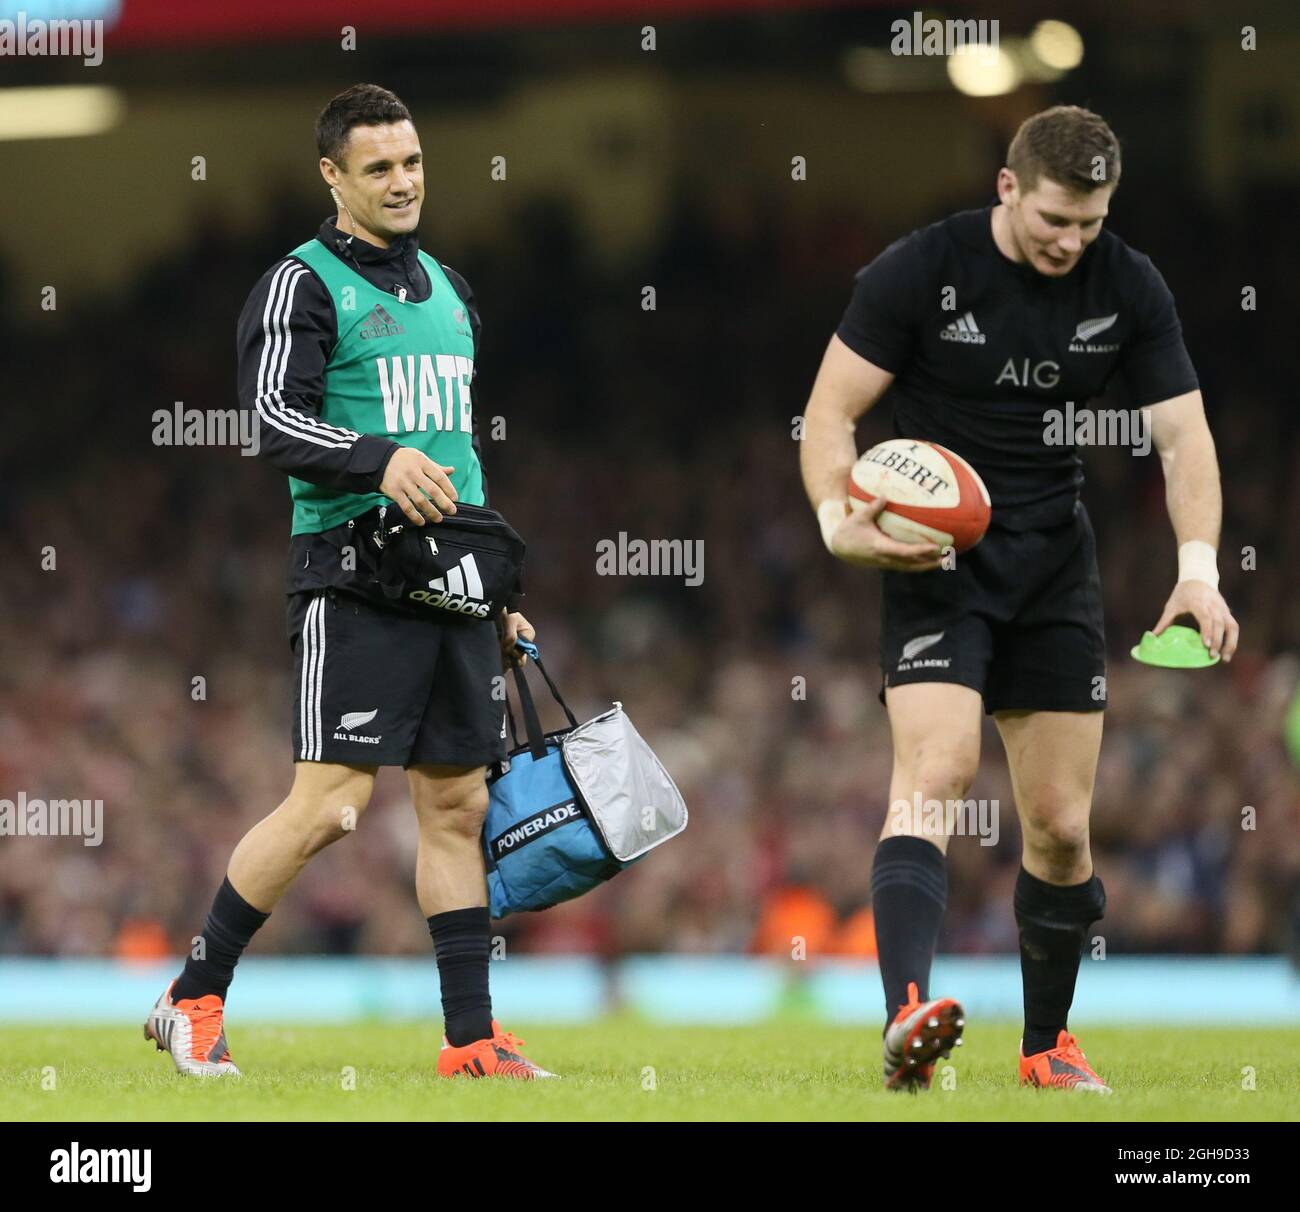 Dan Carter of New Zealand (L) the water boy for the day during the Dove Men Series match between Wales and New Zealand at the Millennium Stadium, Cardiff, wales on 22nd November 2014. Stock Photo